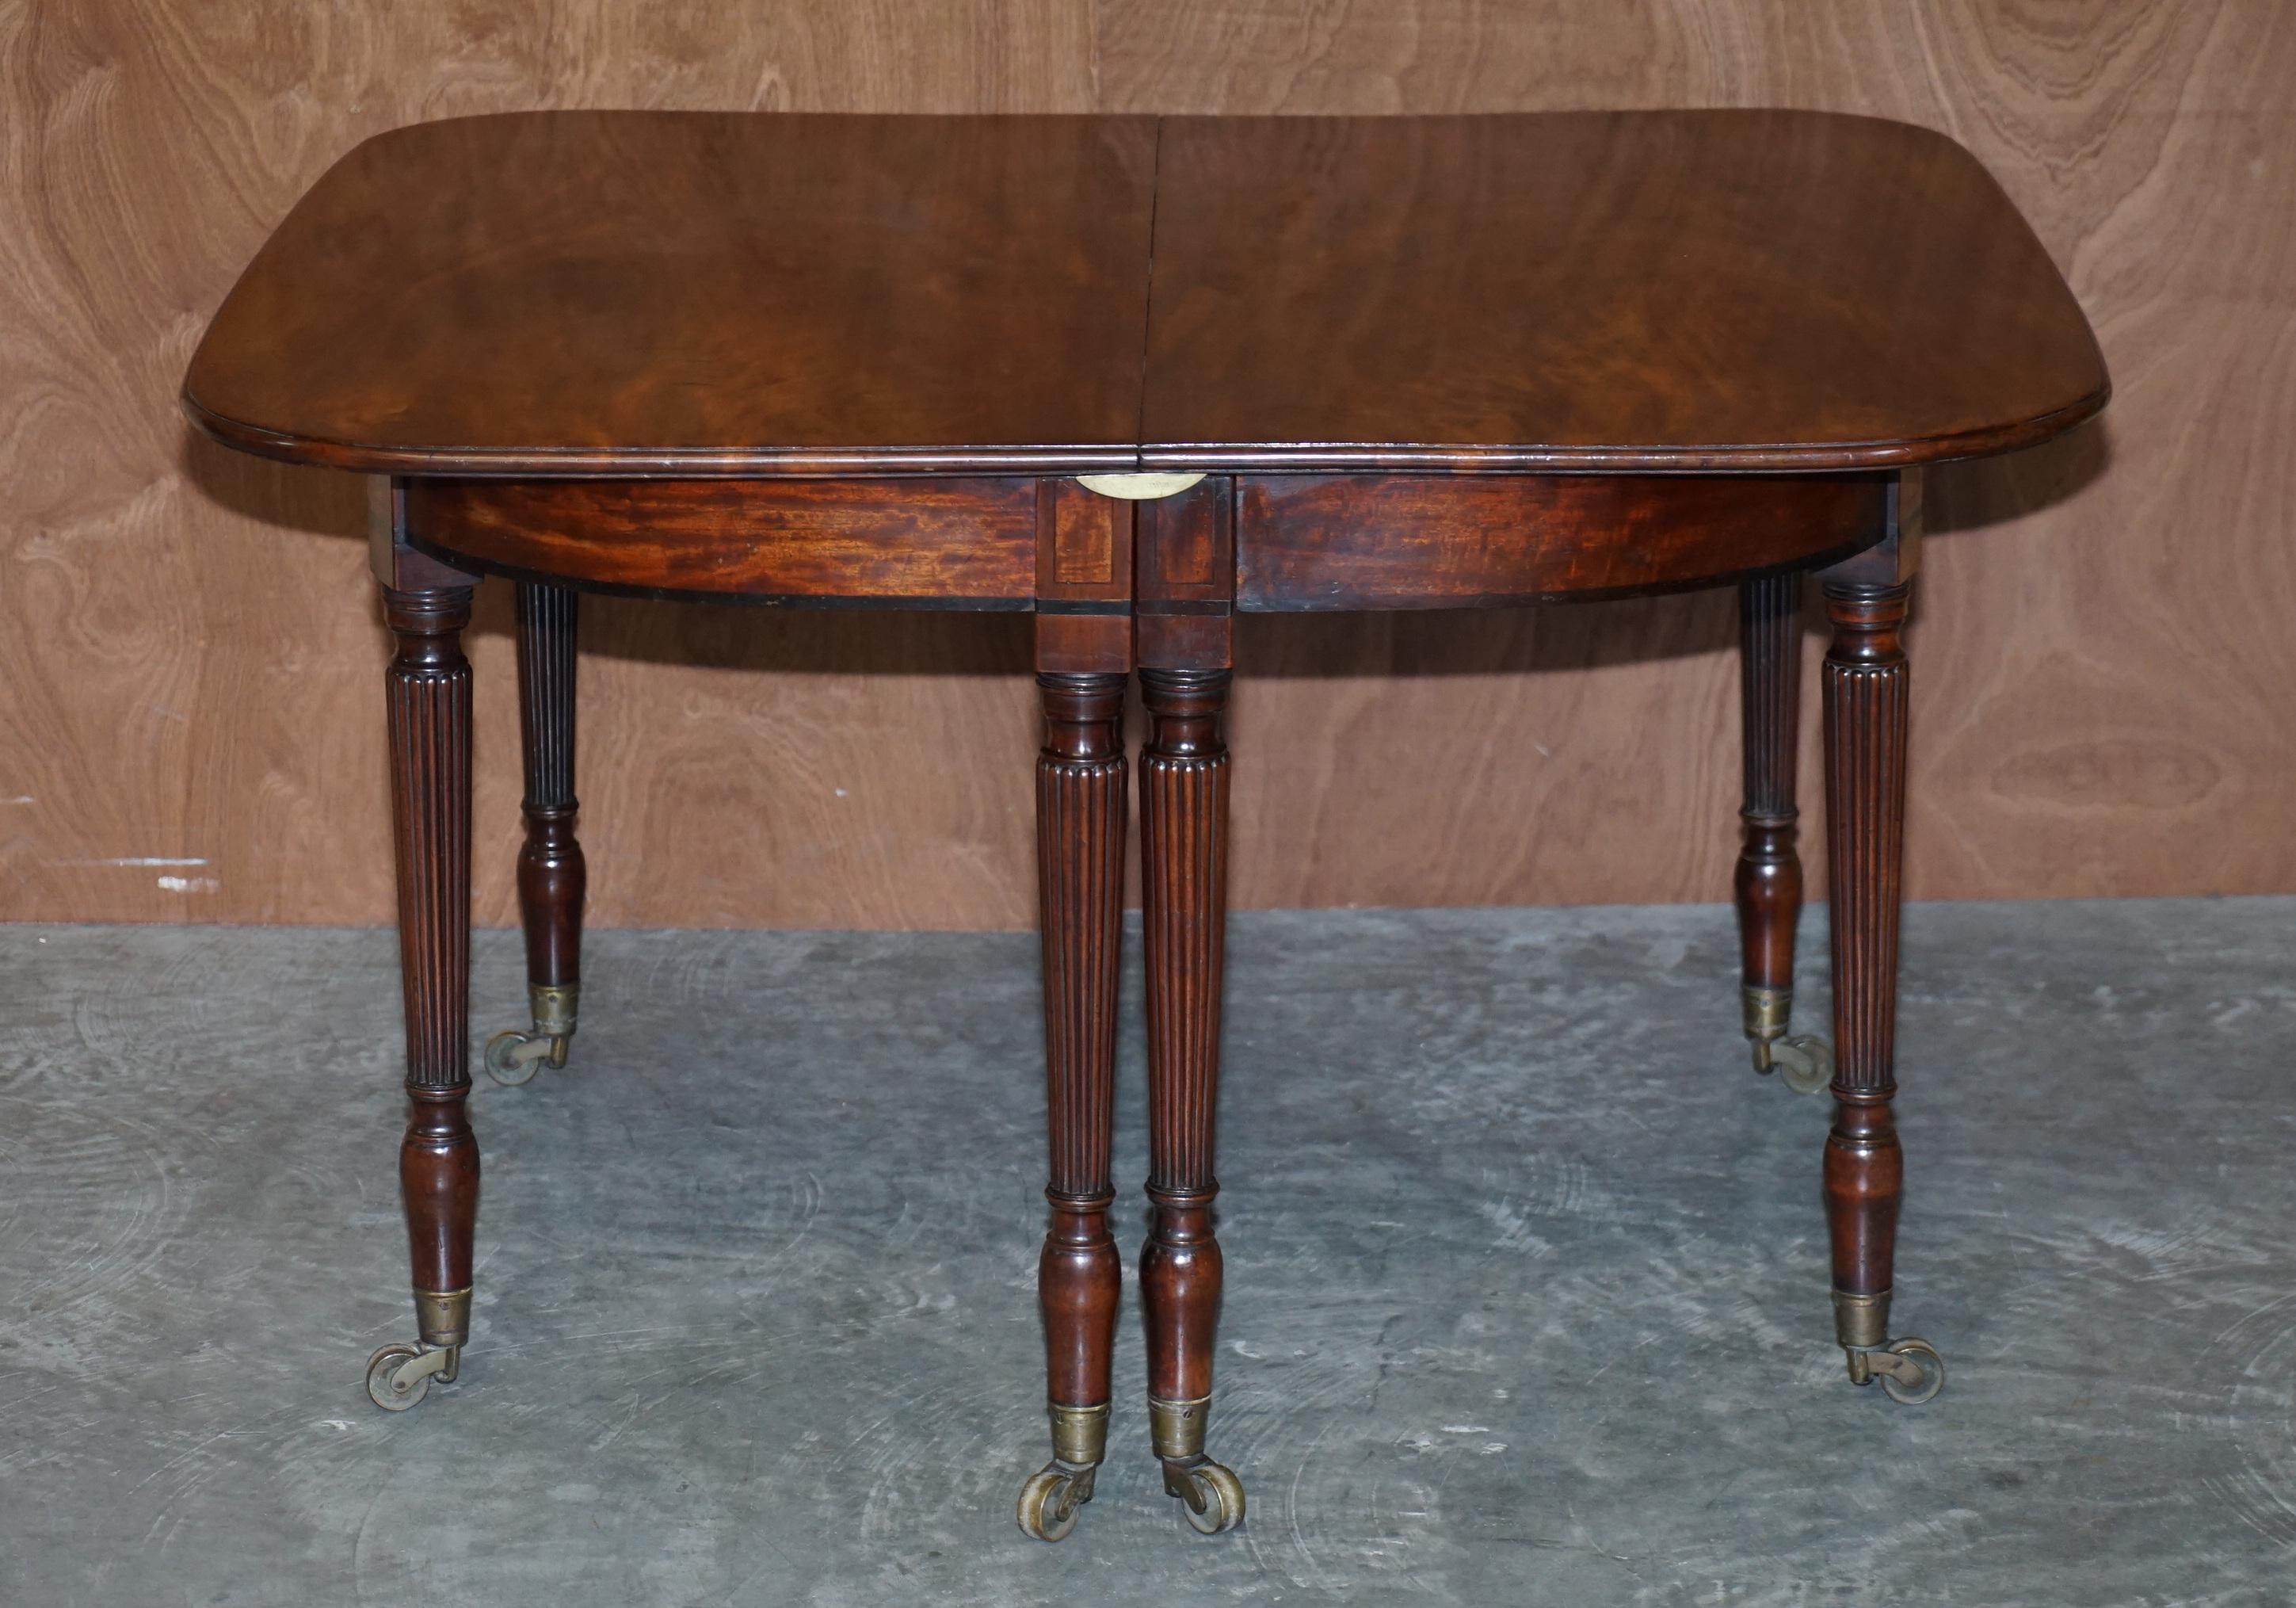 antique dining table